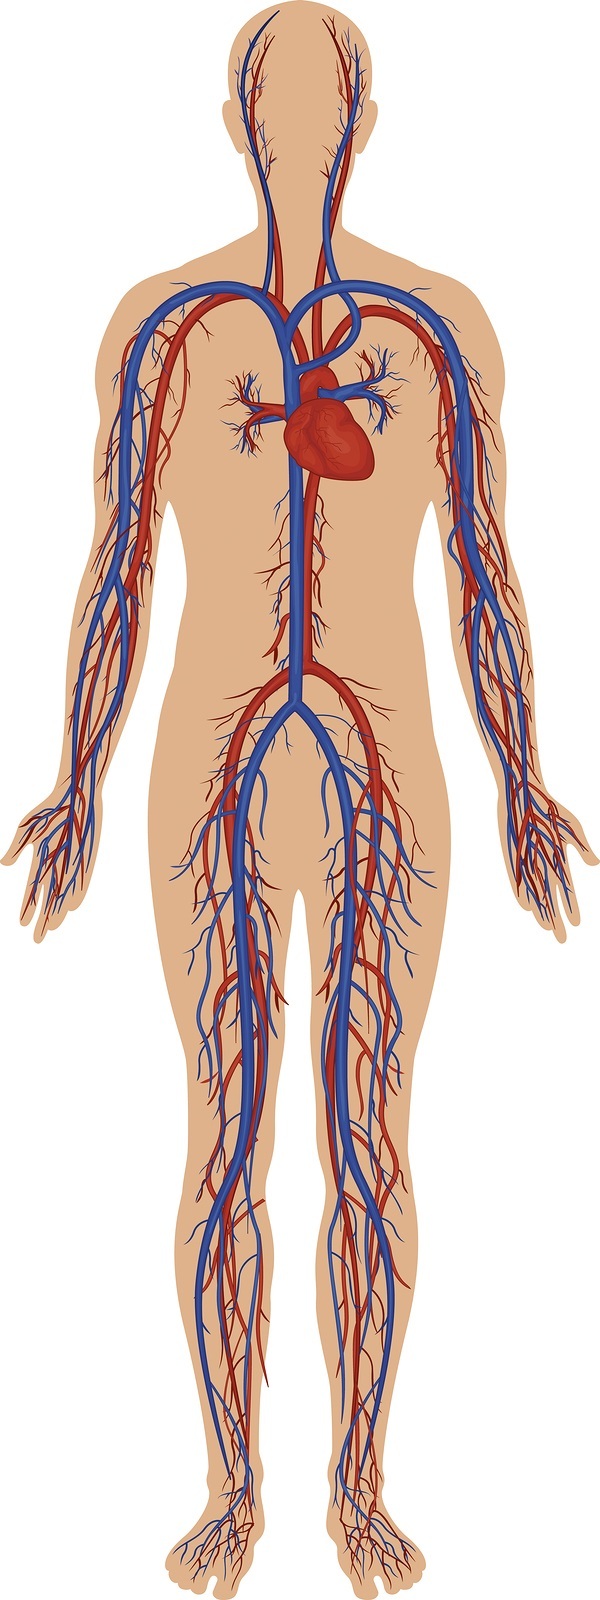 High detail illustration of the human circulatory system